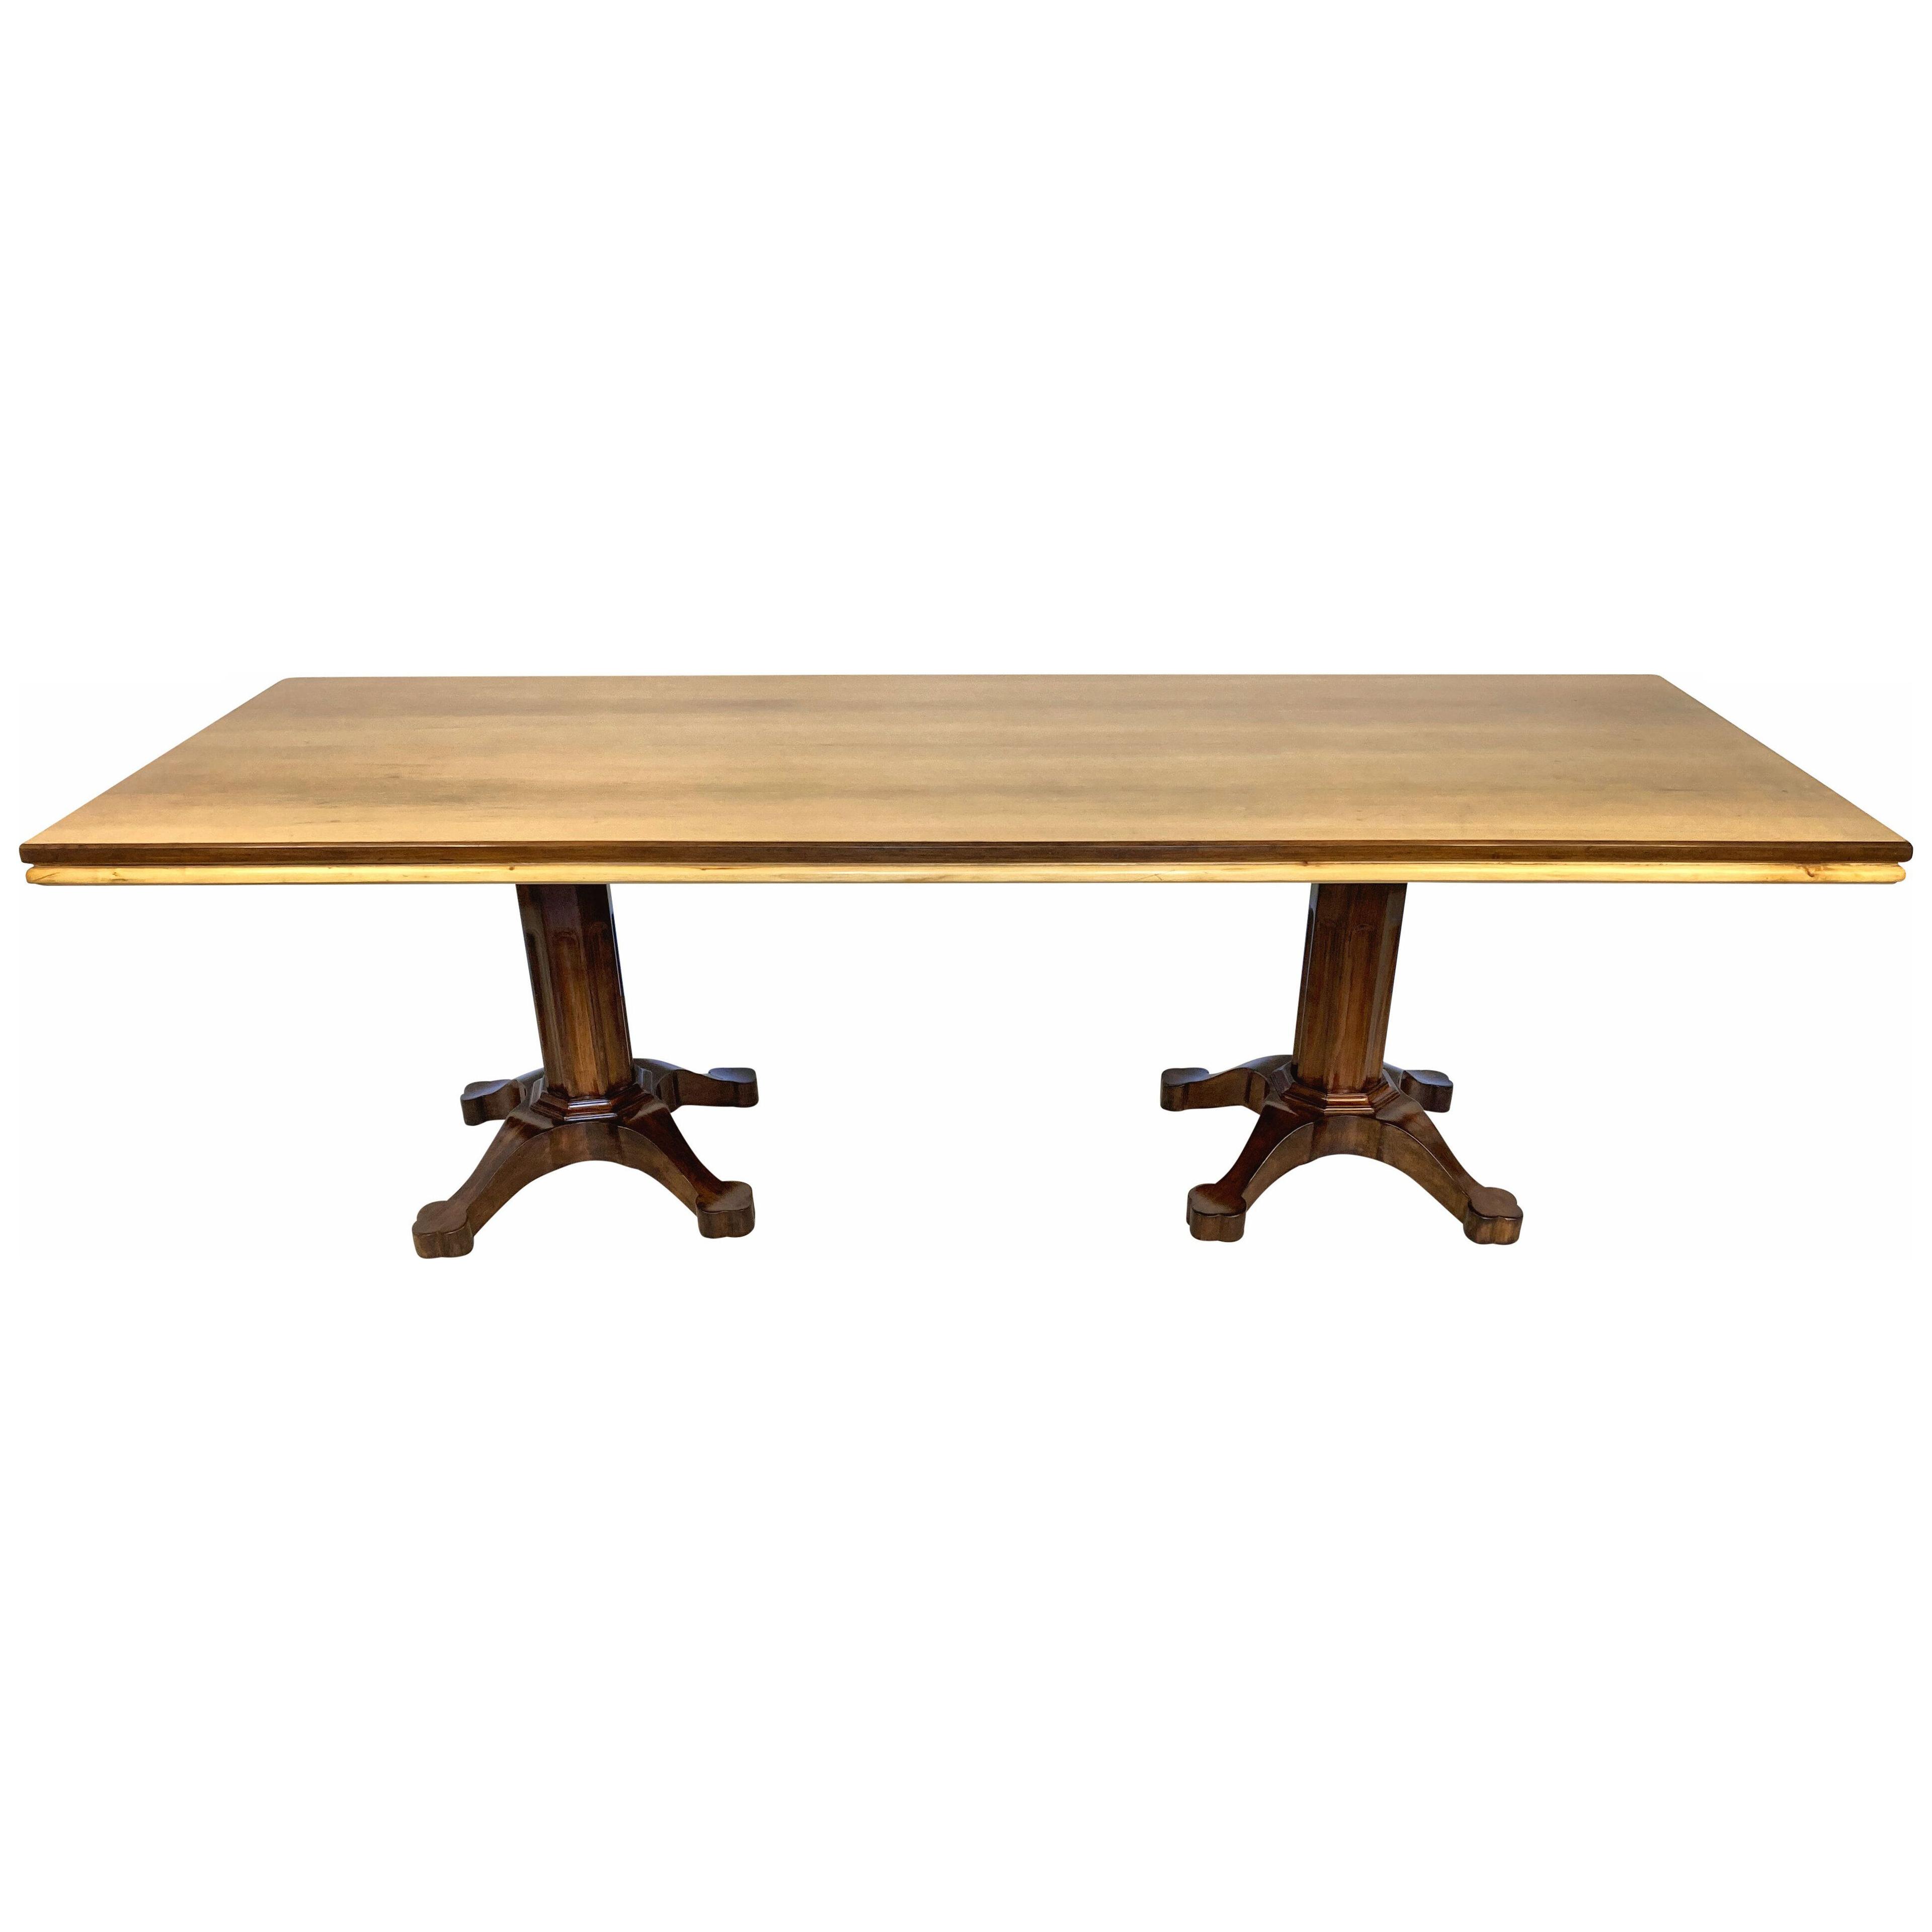 A LARGE ITALIAN MID-CENTURY DINING TABLE IN THE GOTHIC MANNER